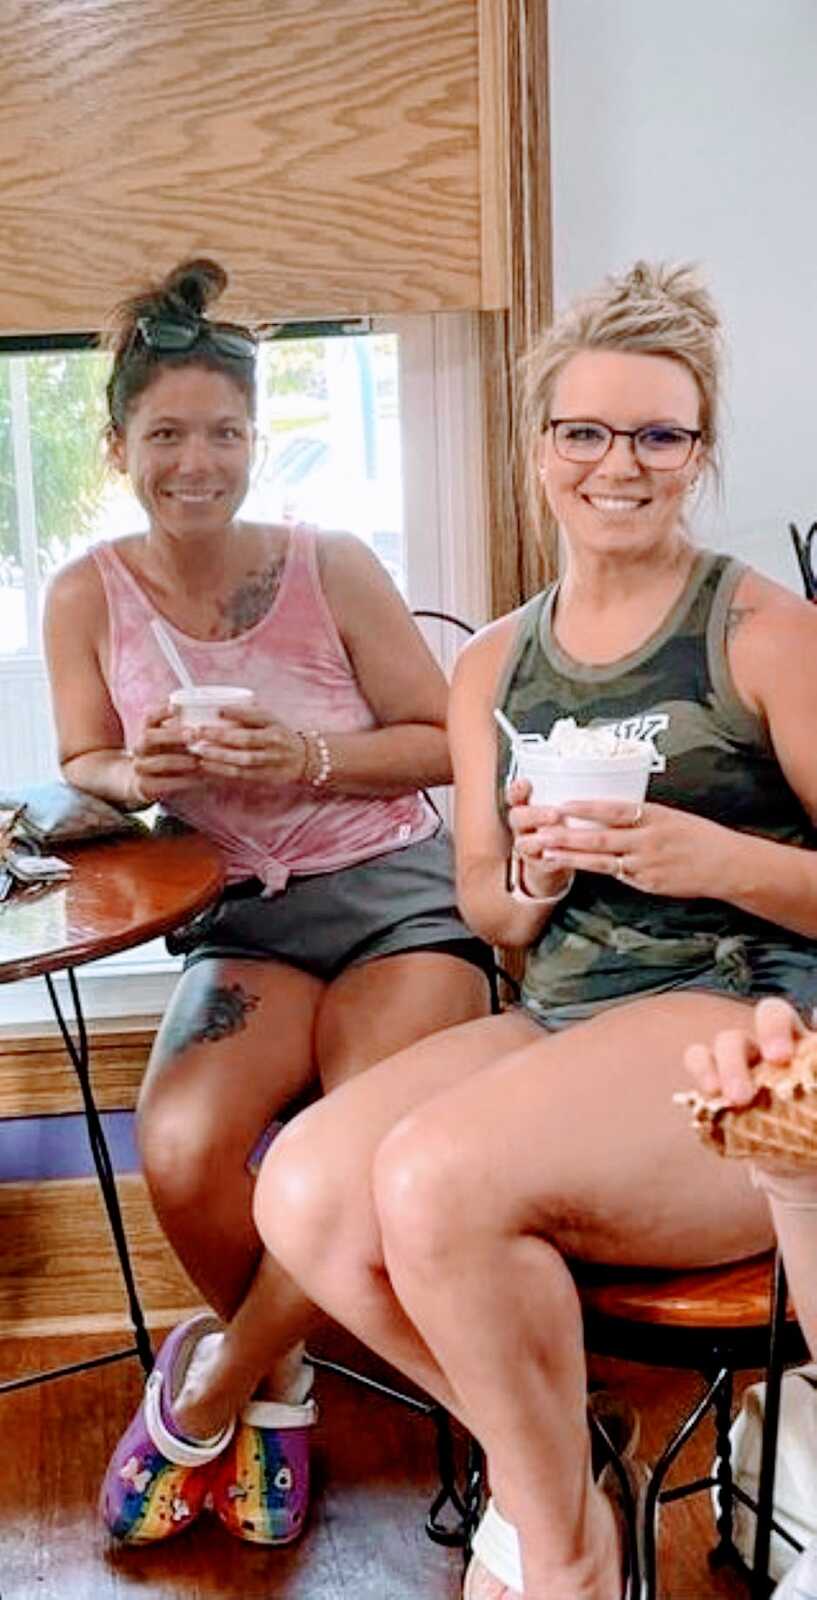 Two friends and co-parents take a photo together while enjoying ice cream on a hot summer day